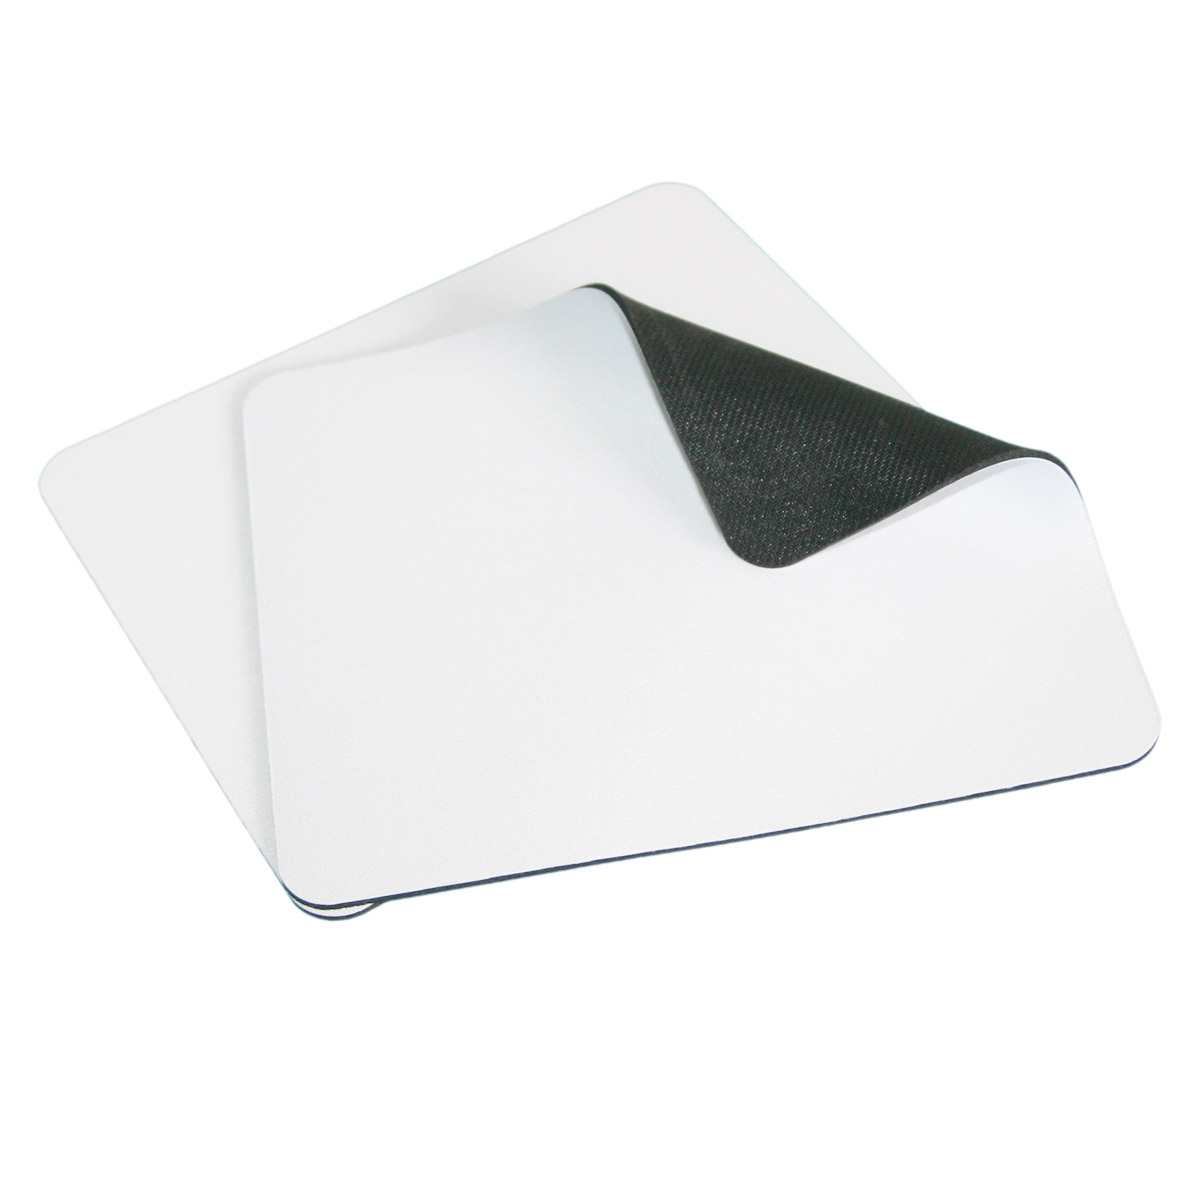 Mouse Pad for sublimation - 10 pieces